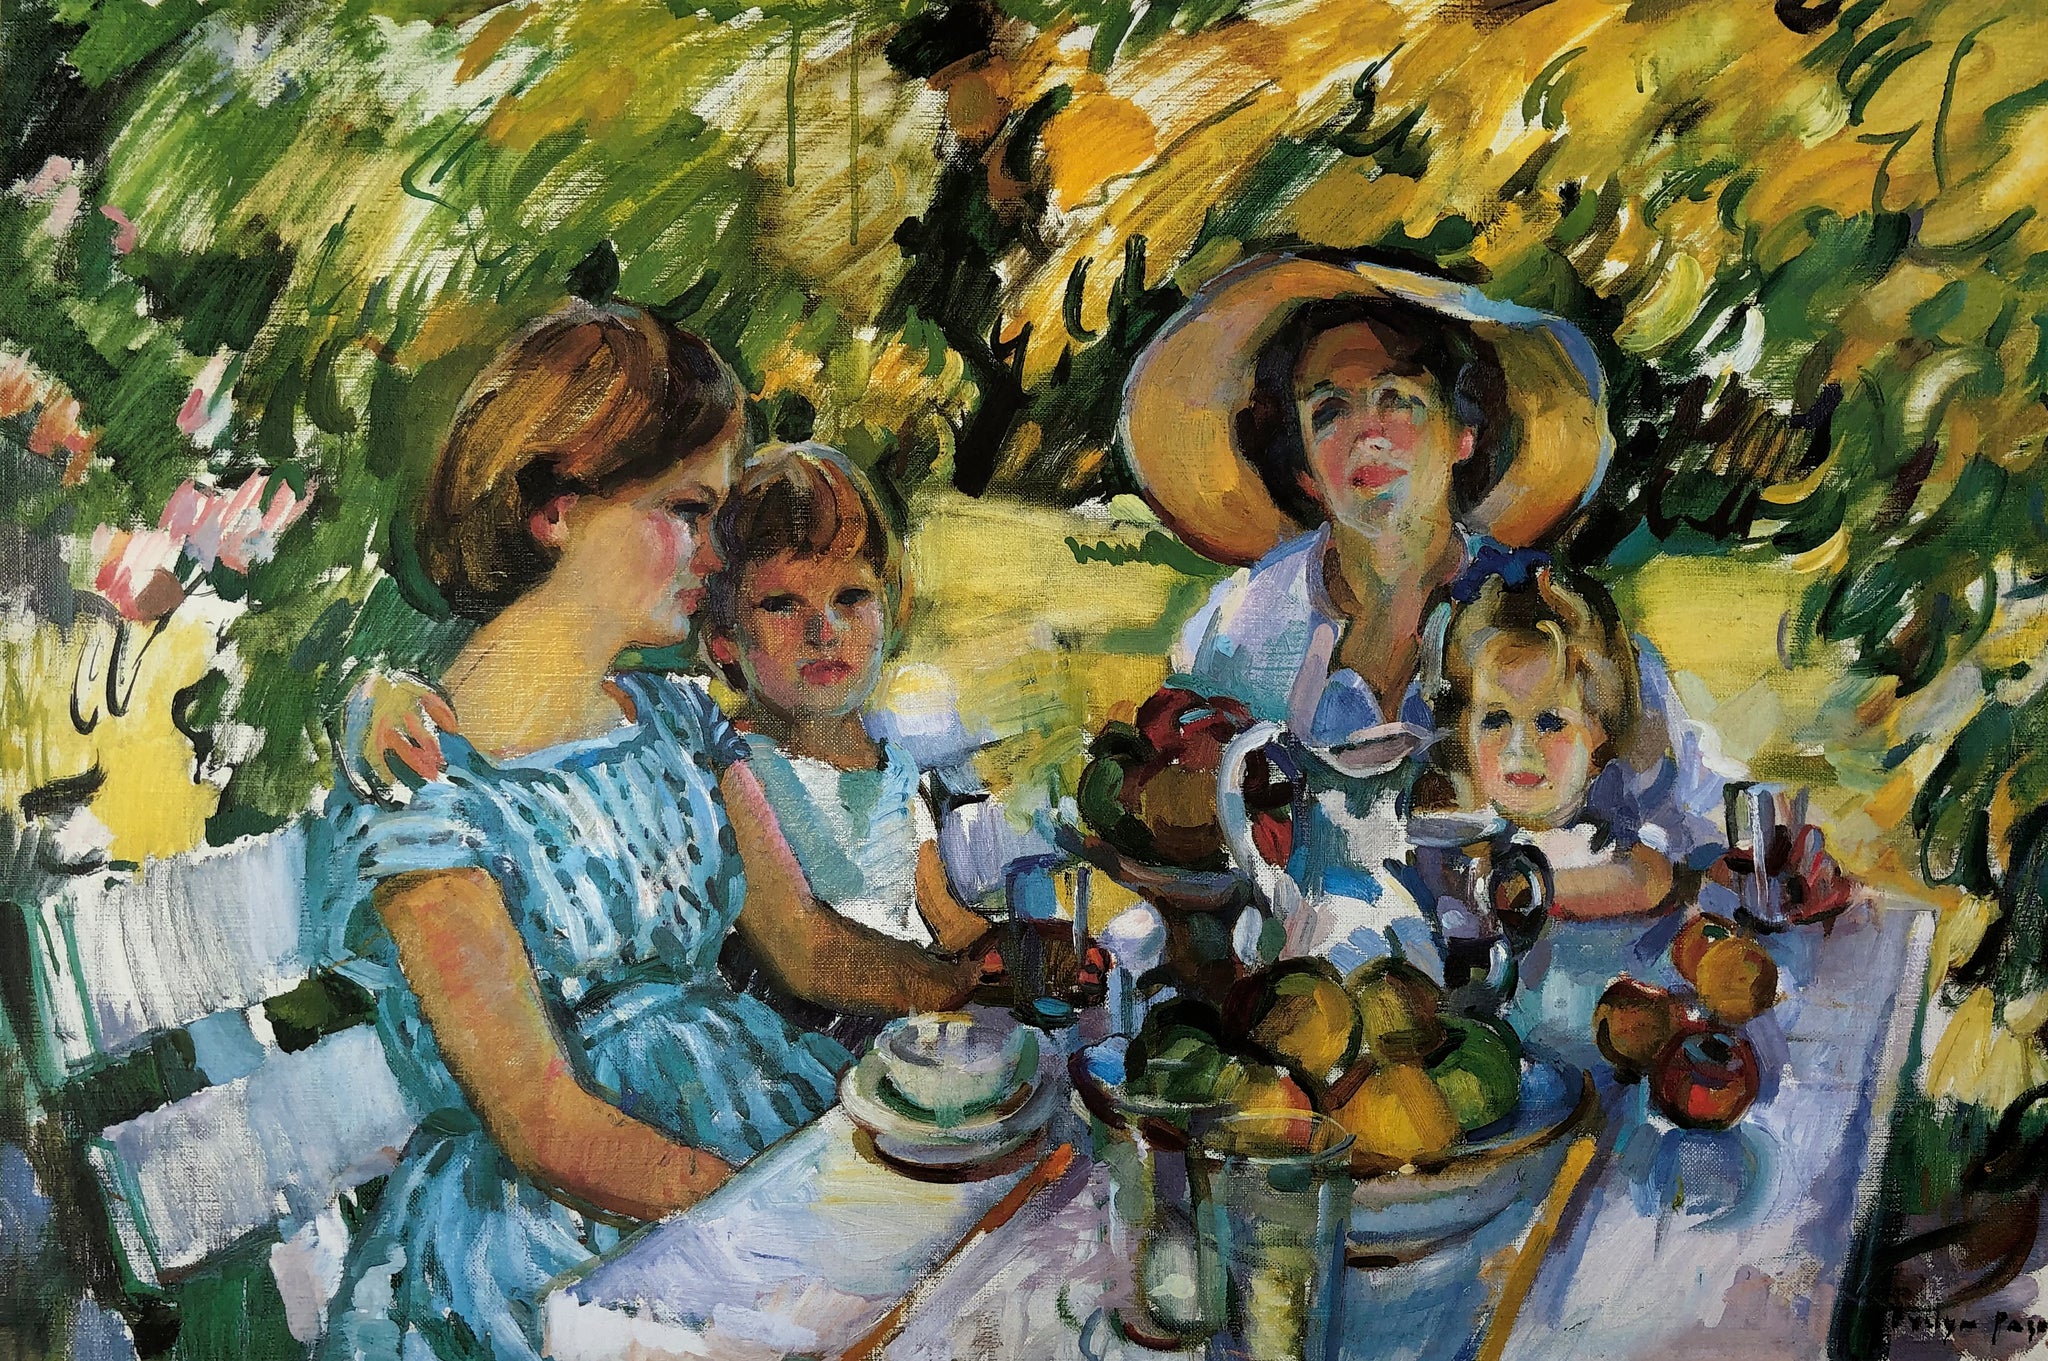 "Luncheon Under the Ash Tree"- Evelyn Page